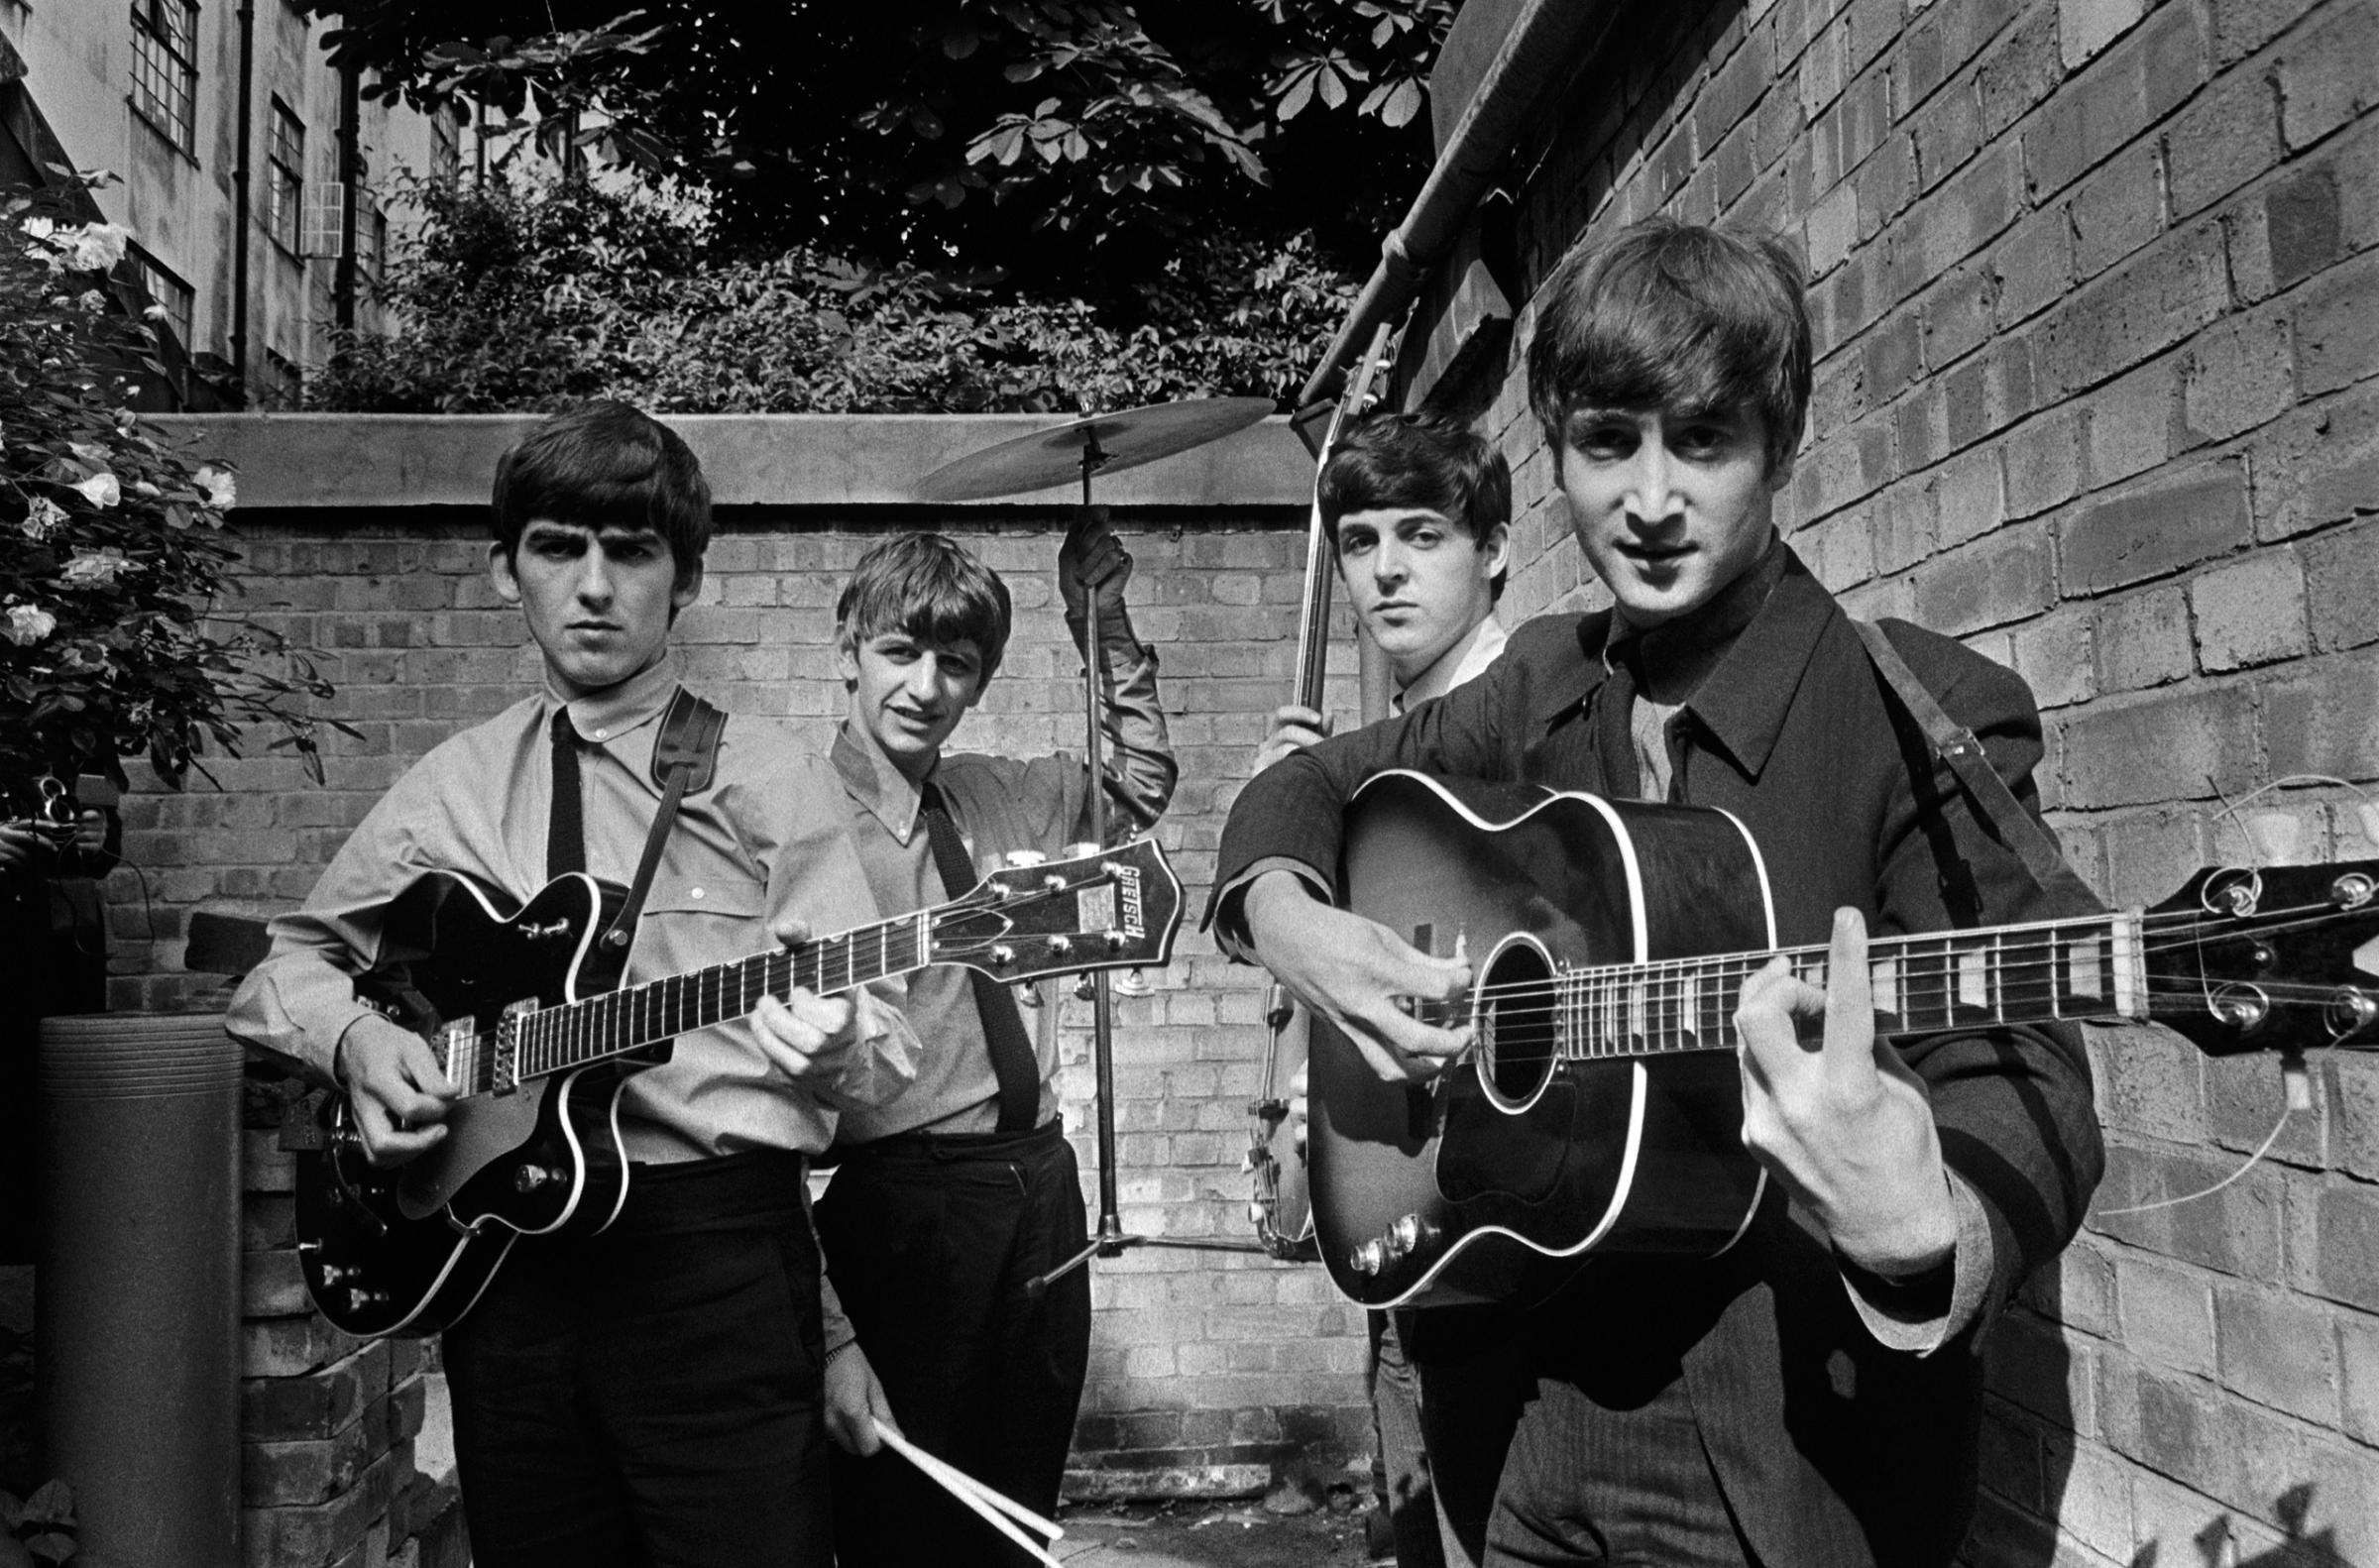 The Beatles posing in a small backyard in London with their instruments, 1963.